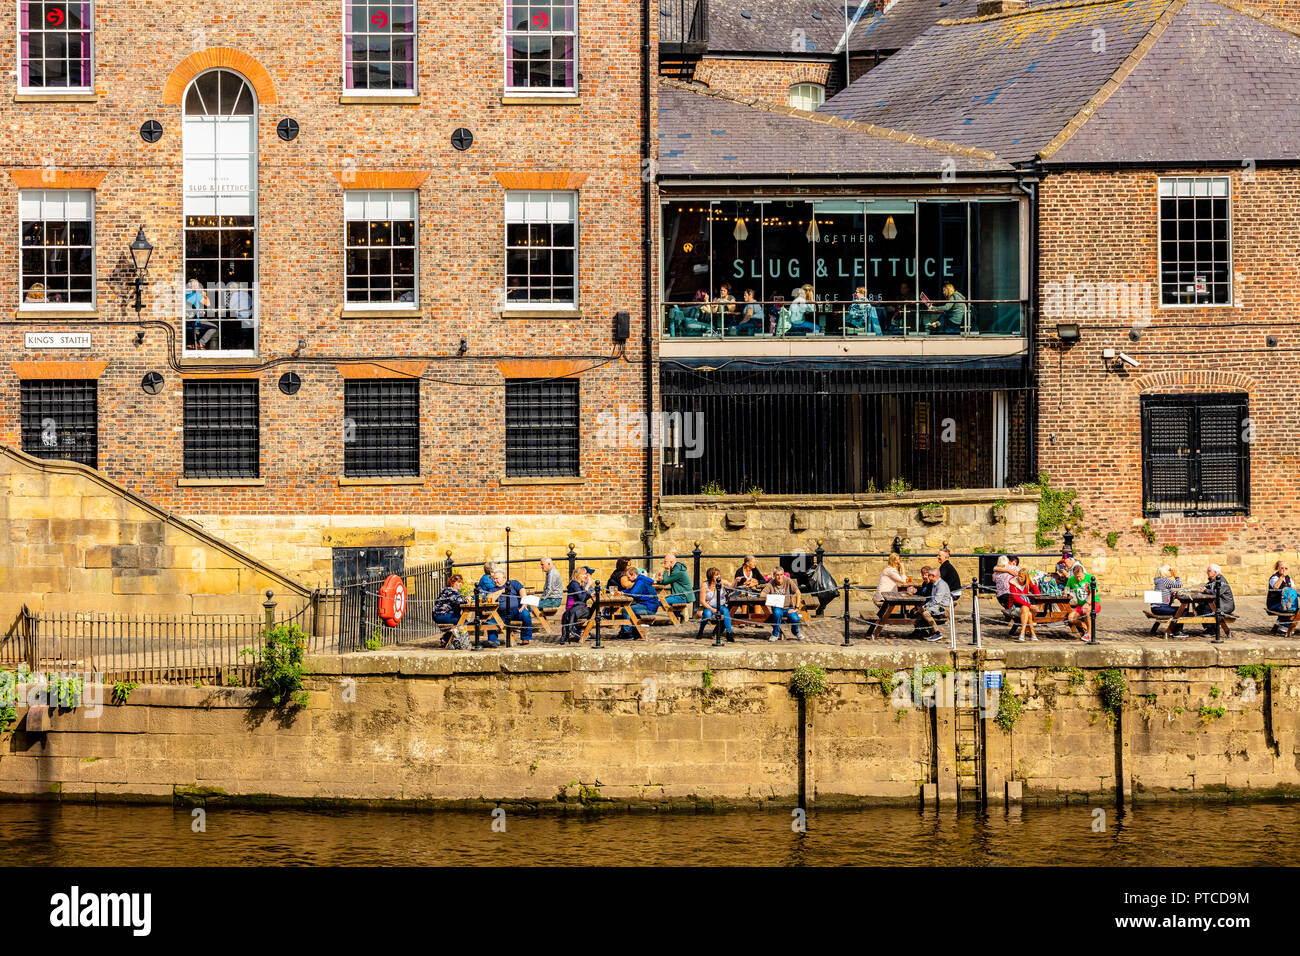 York, UK - August 28 2018: River Ouse urban landscape featuring The Lowther pub and riverside dining social space Stock Photo